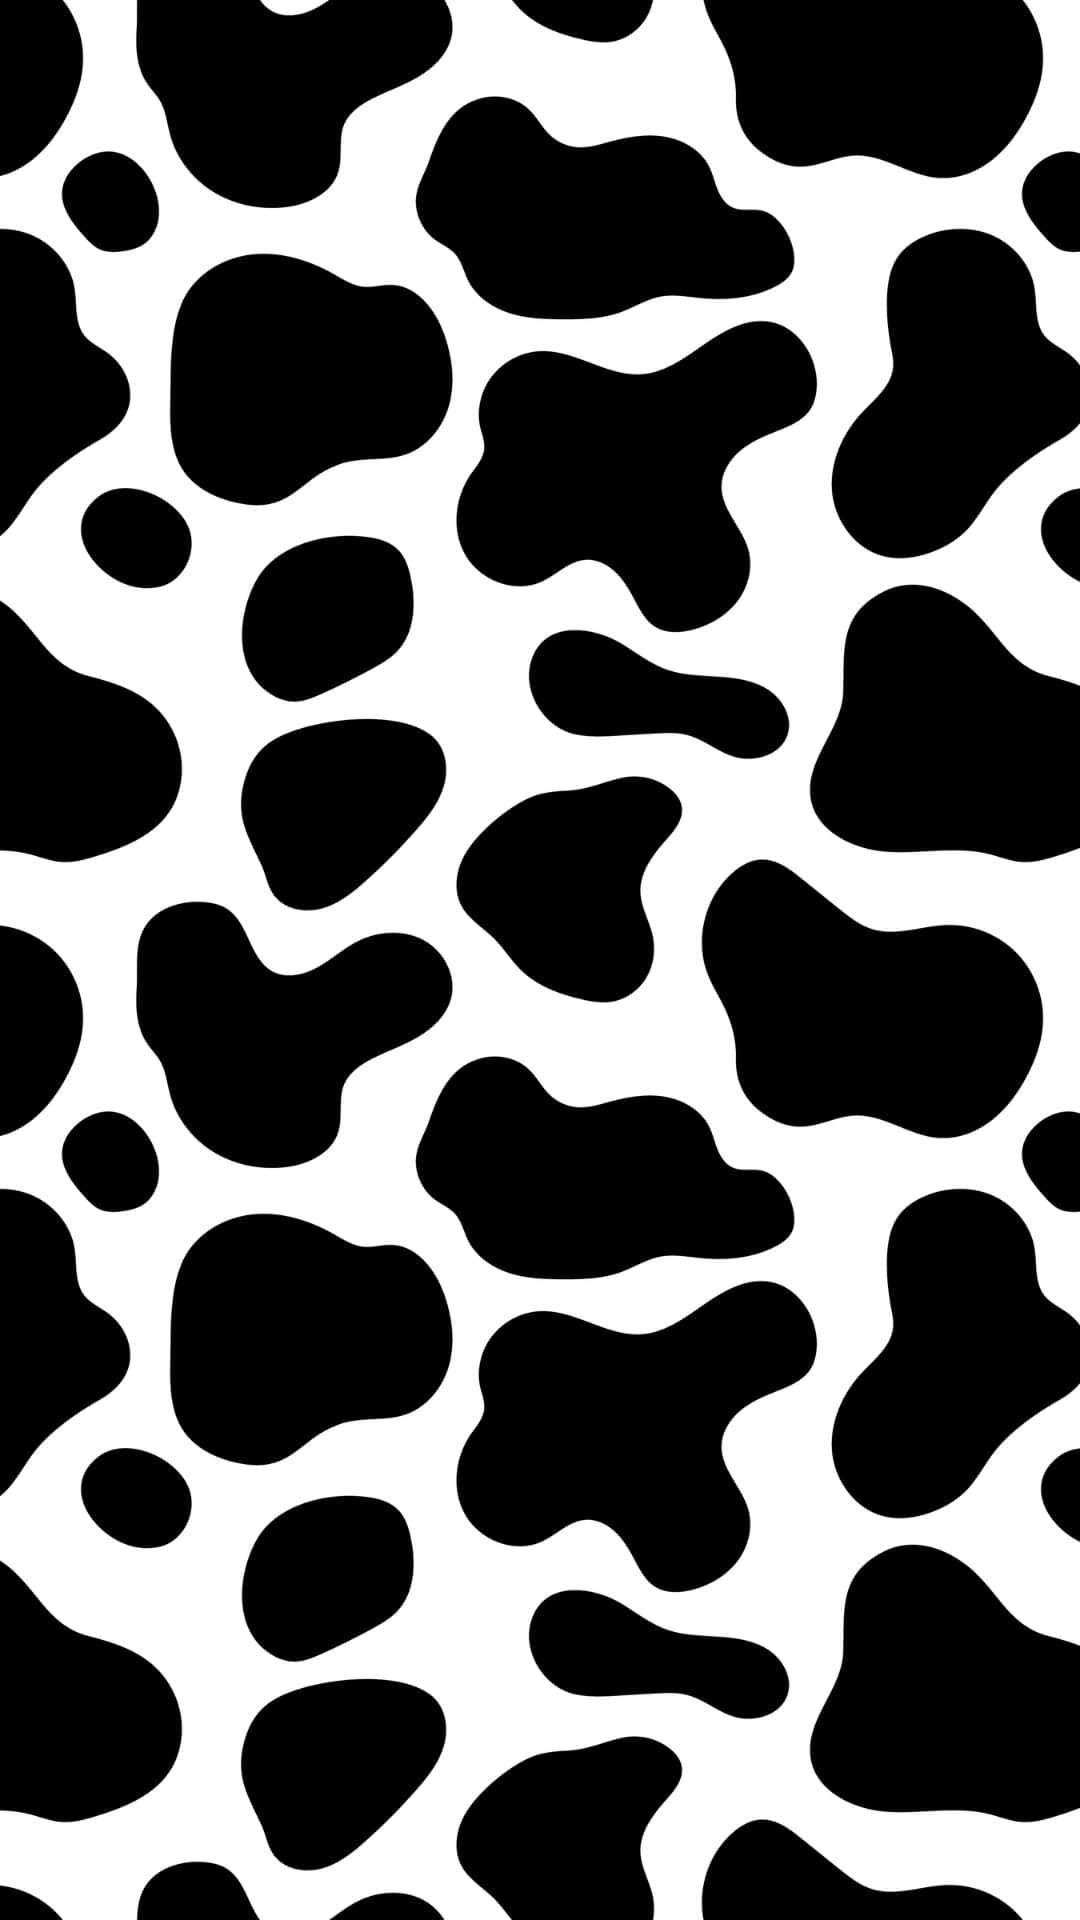 Let Your Iphone Keep Up With The Moo-vement With Our Cow Themed Phone Cases! Background